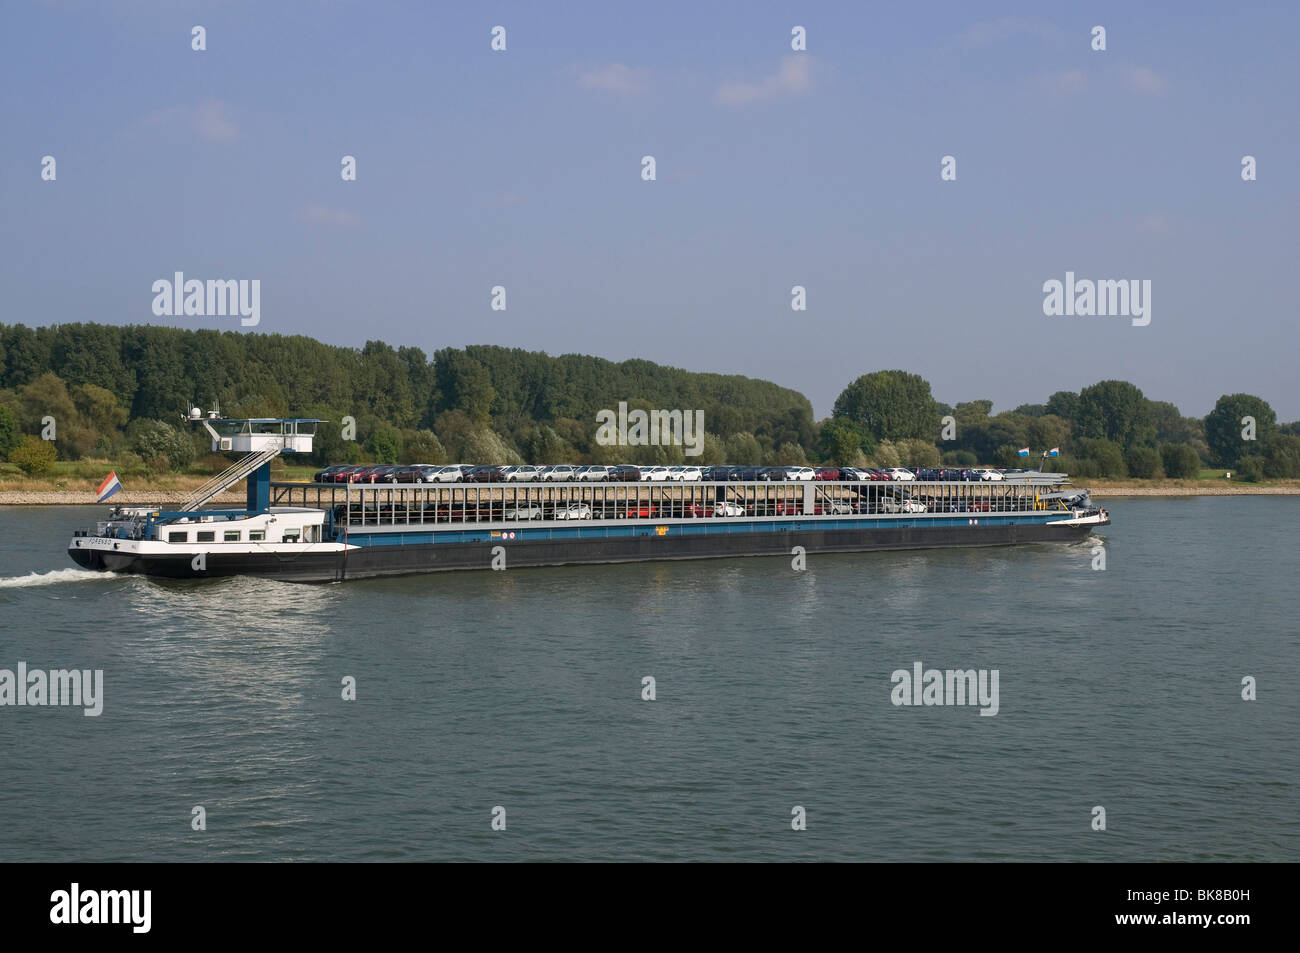 Loaded Barge High Resolution Stock Photography and Images - Alamy